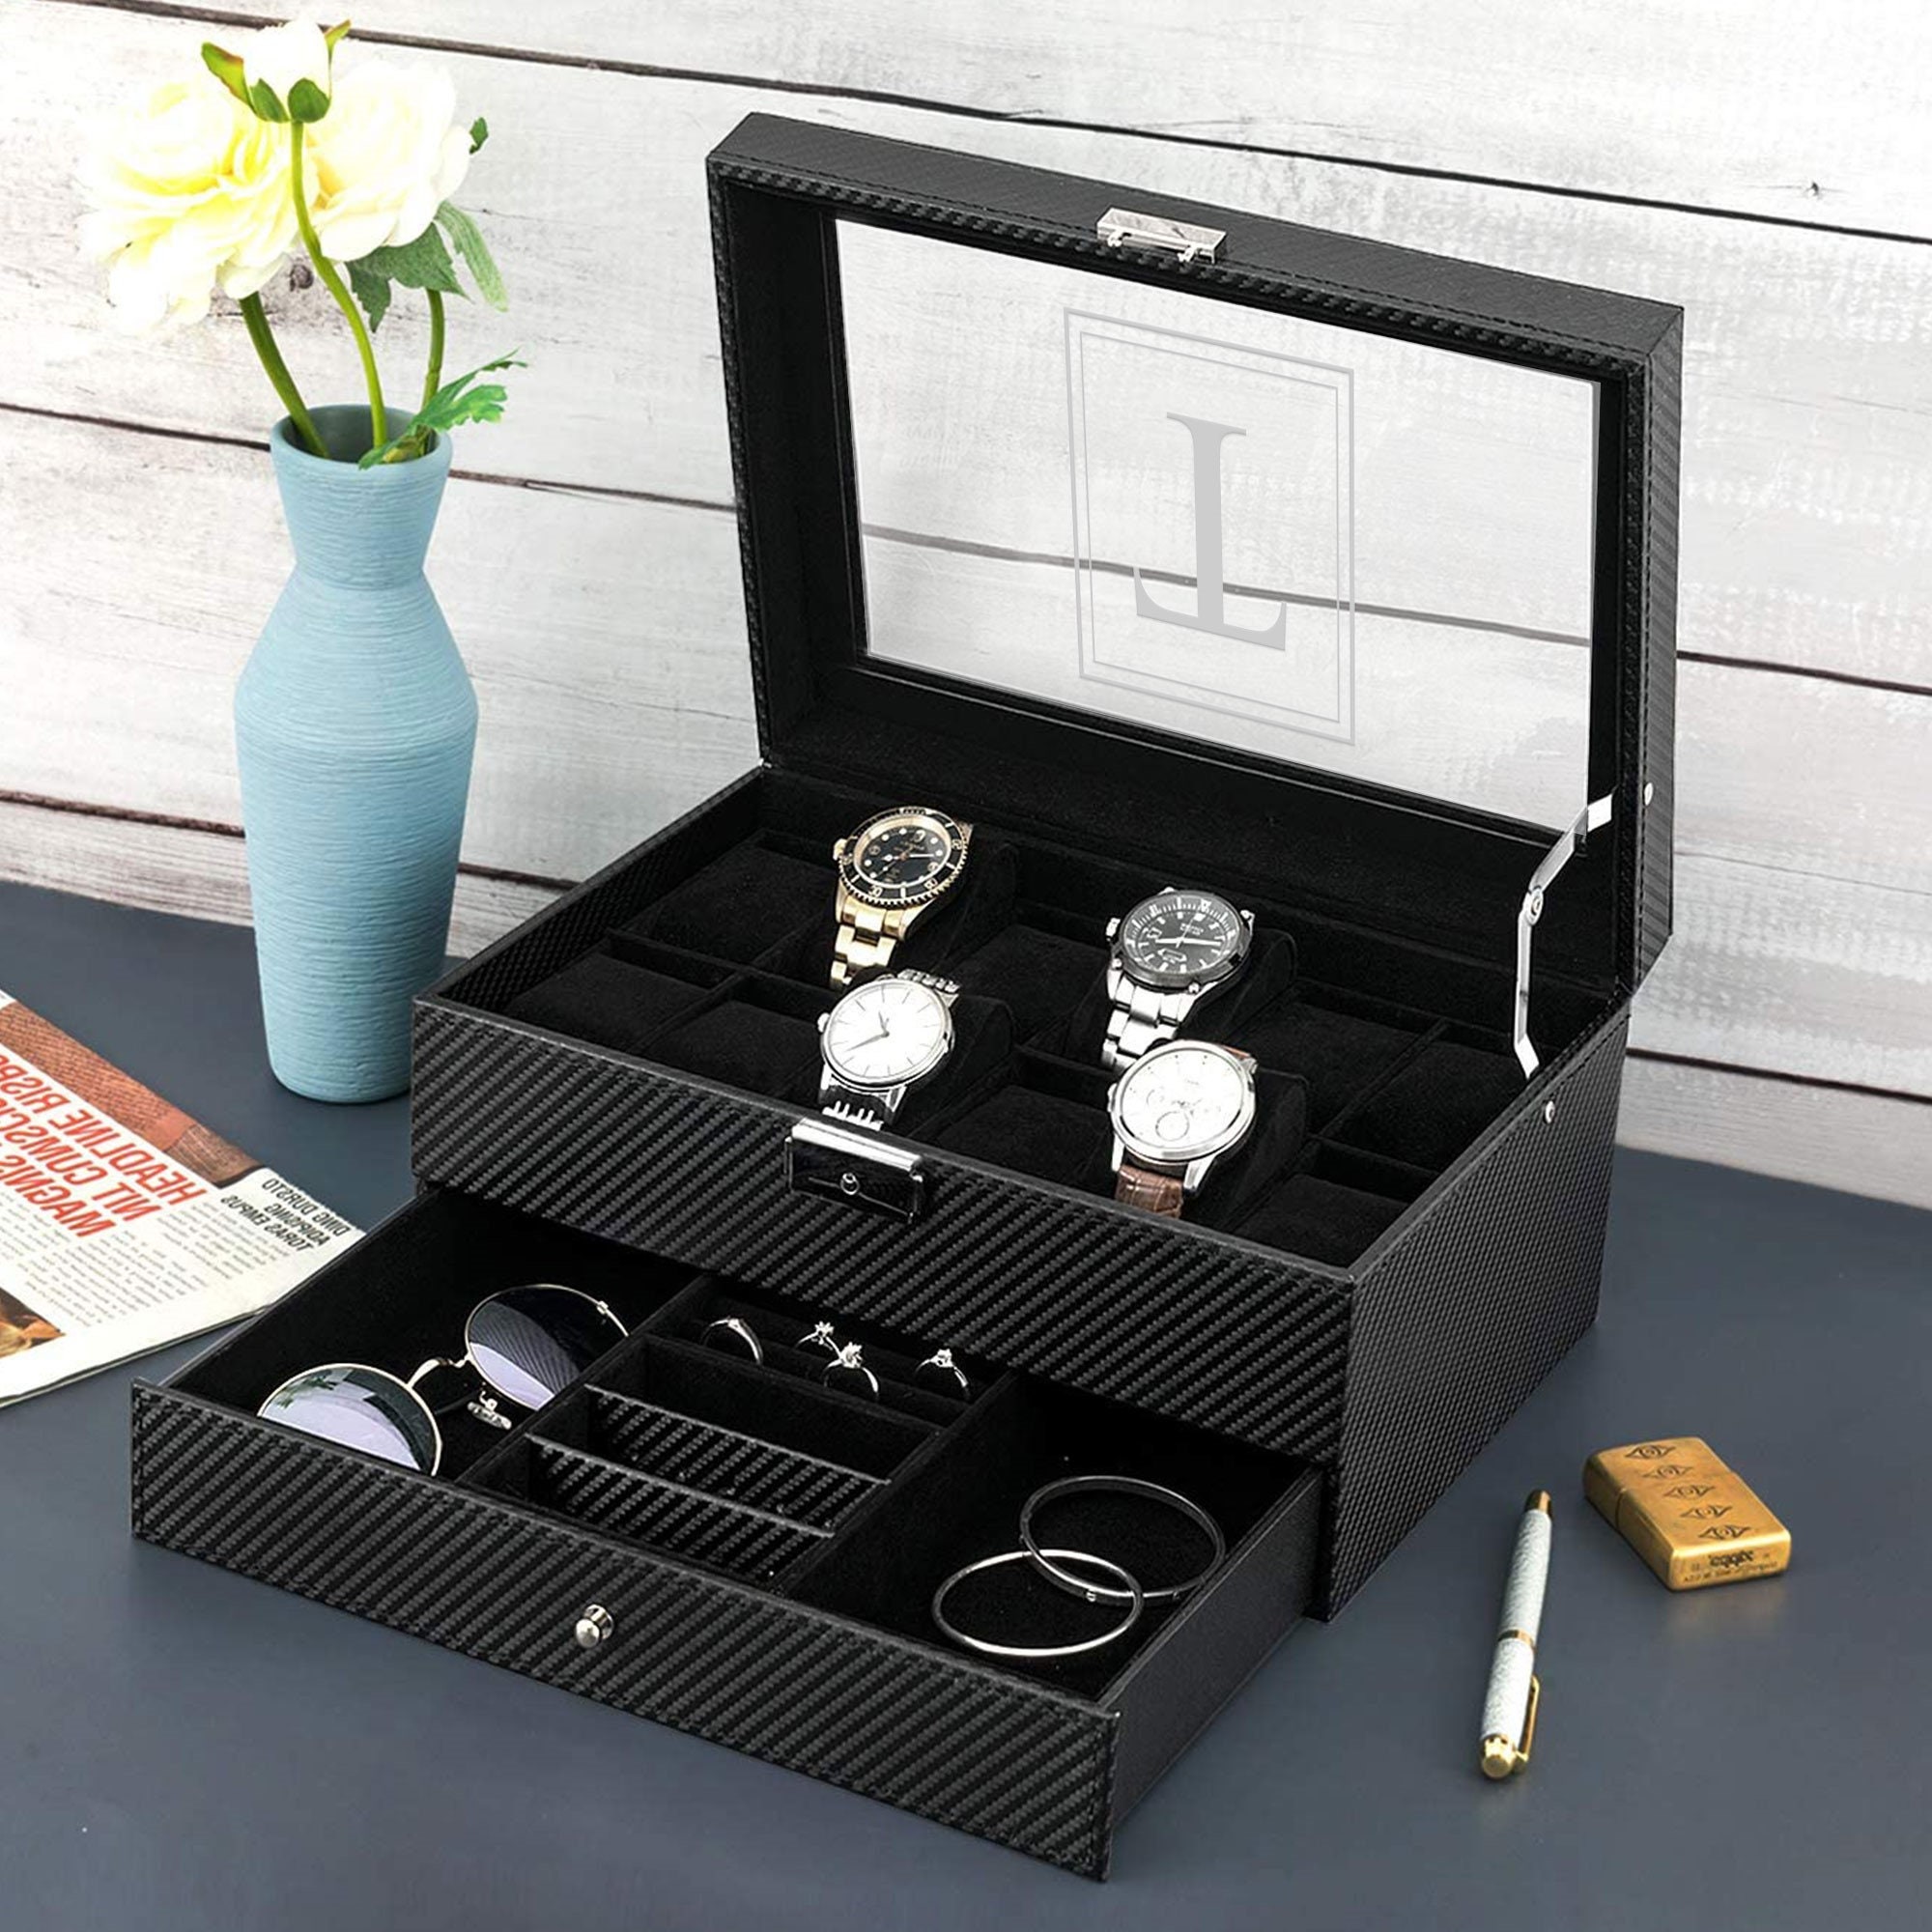 Anniversary Gift for Him 5 Year - Men's Openwork Watch + Watch Box - Great Anniversary Gift Idea for Husband, from Wife